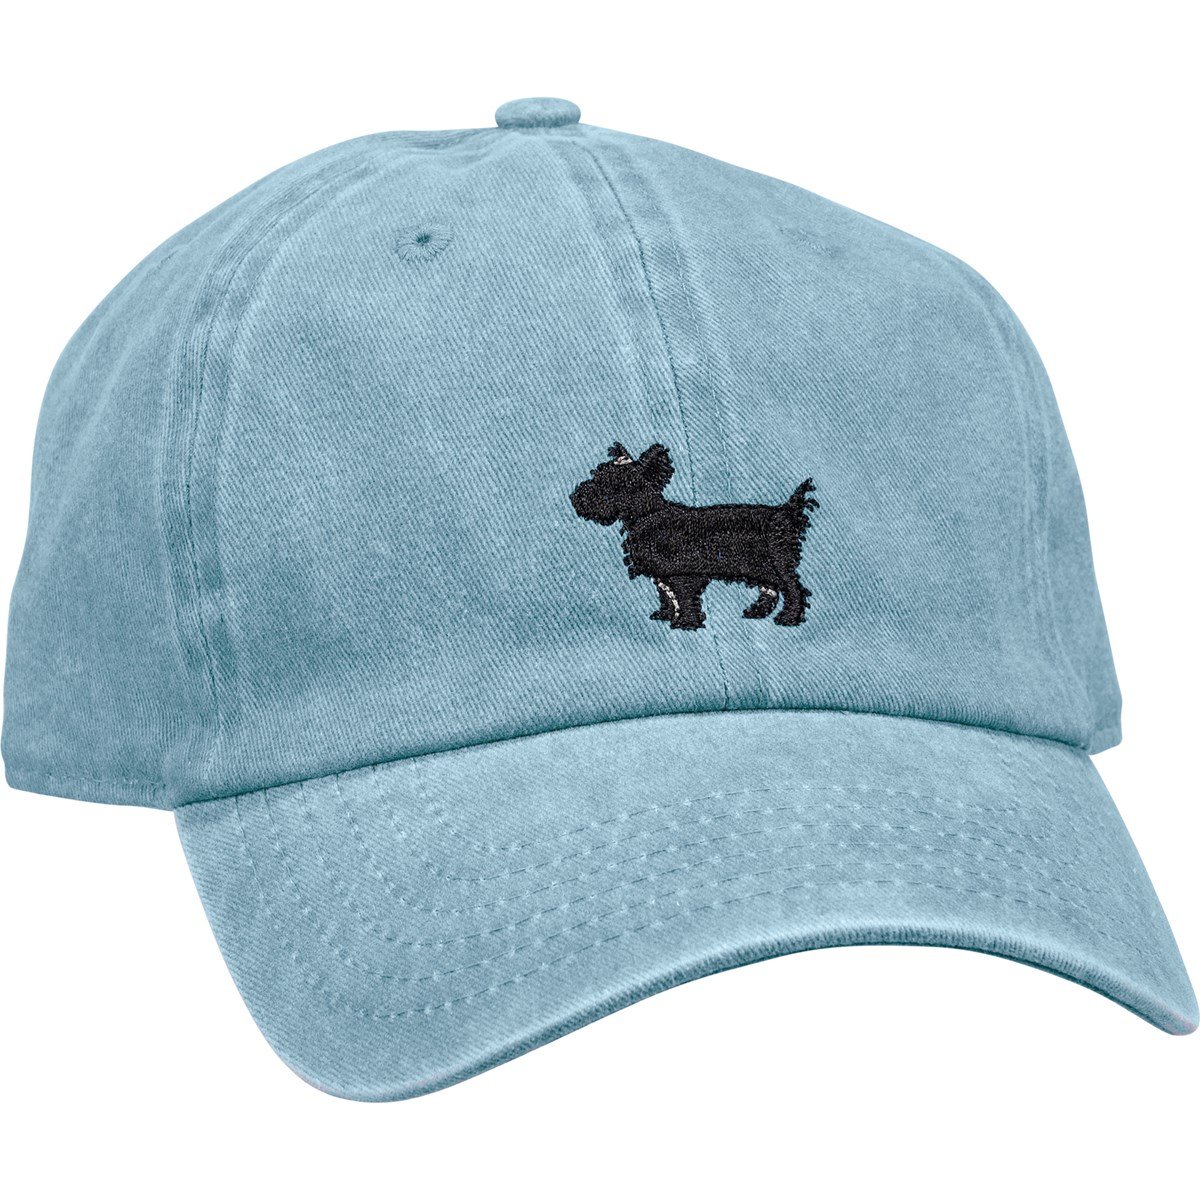 Baseball Cap - Love My Yorkie - One Size Fits Most - Cotton, Metal